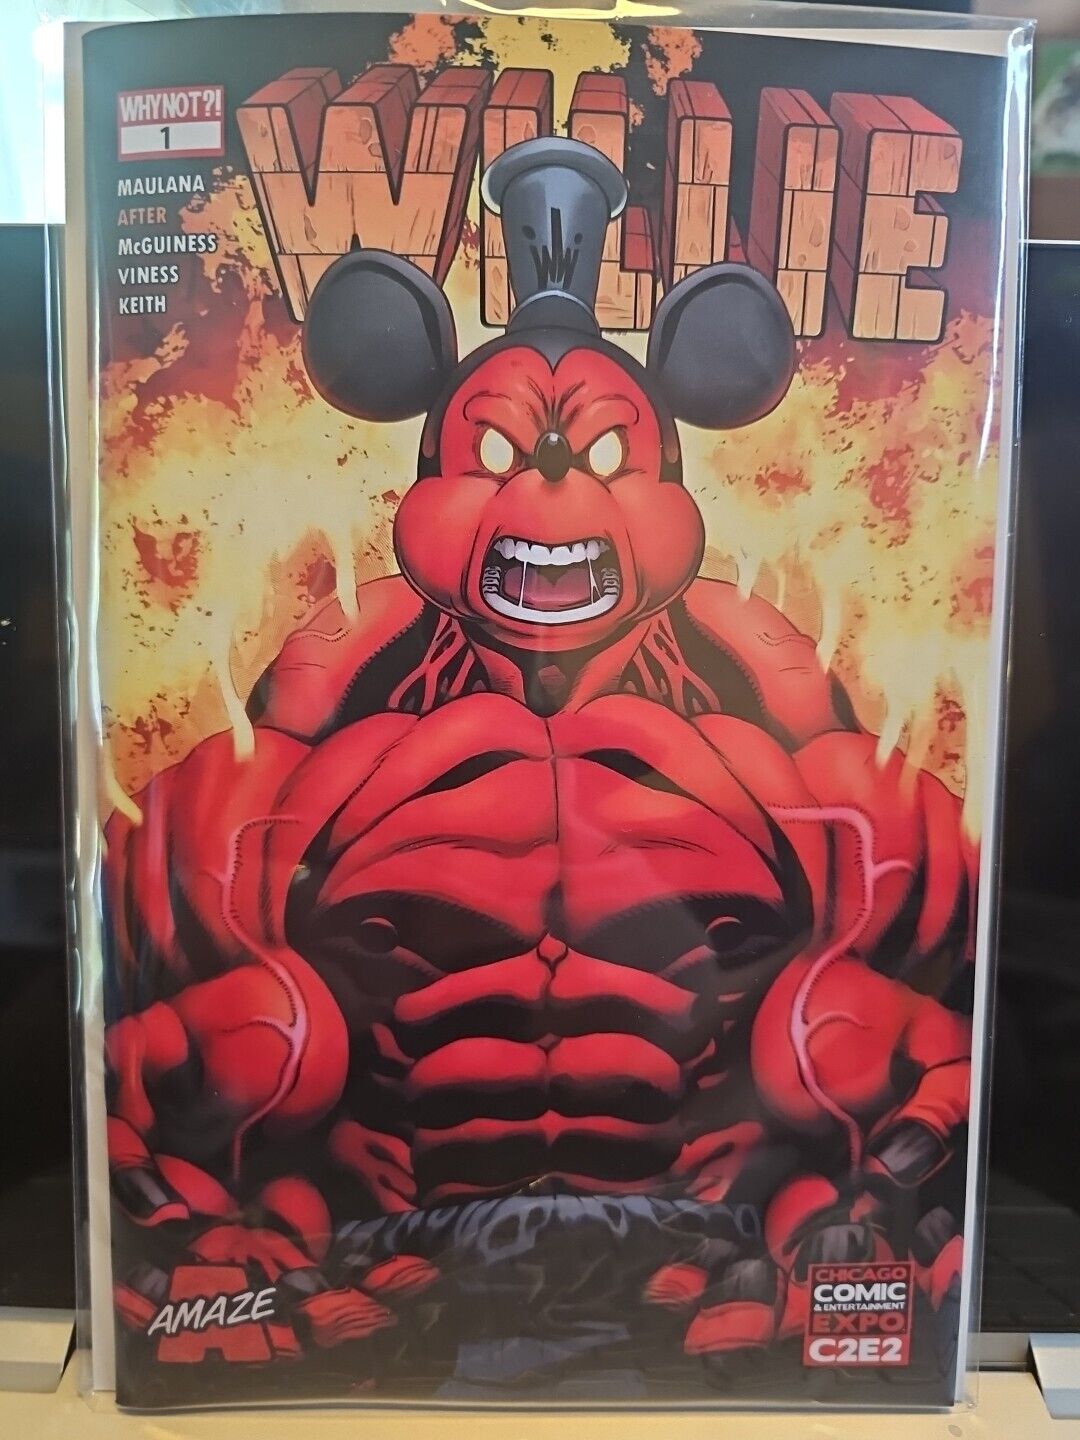 Why Not? Willie #1 (Red Hulk C2E2 Exclusive Ltd 300)